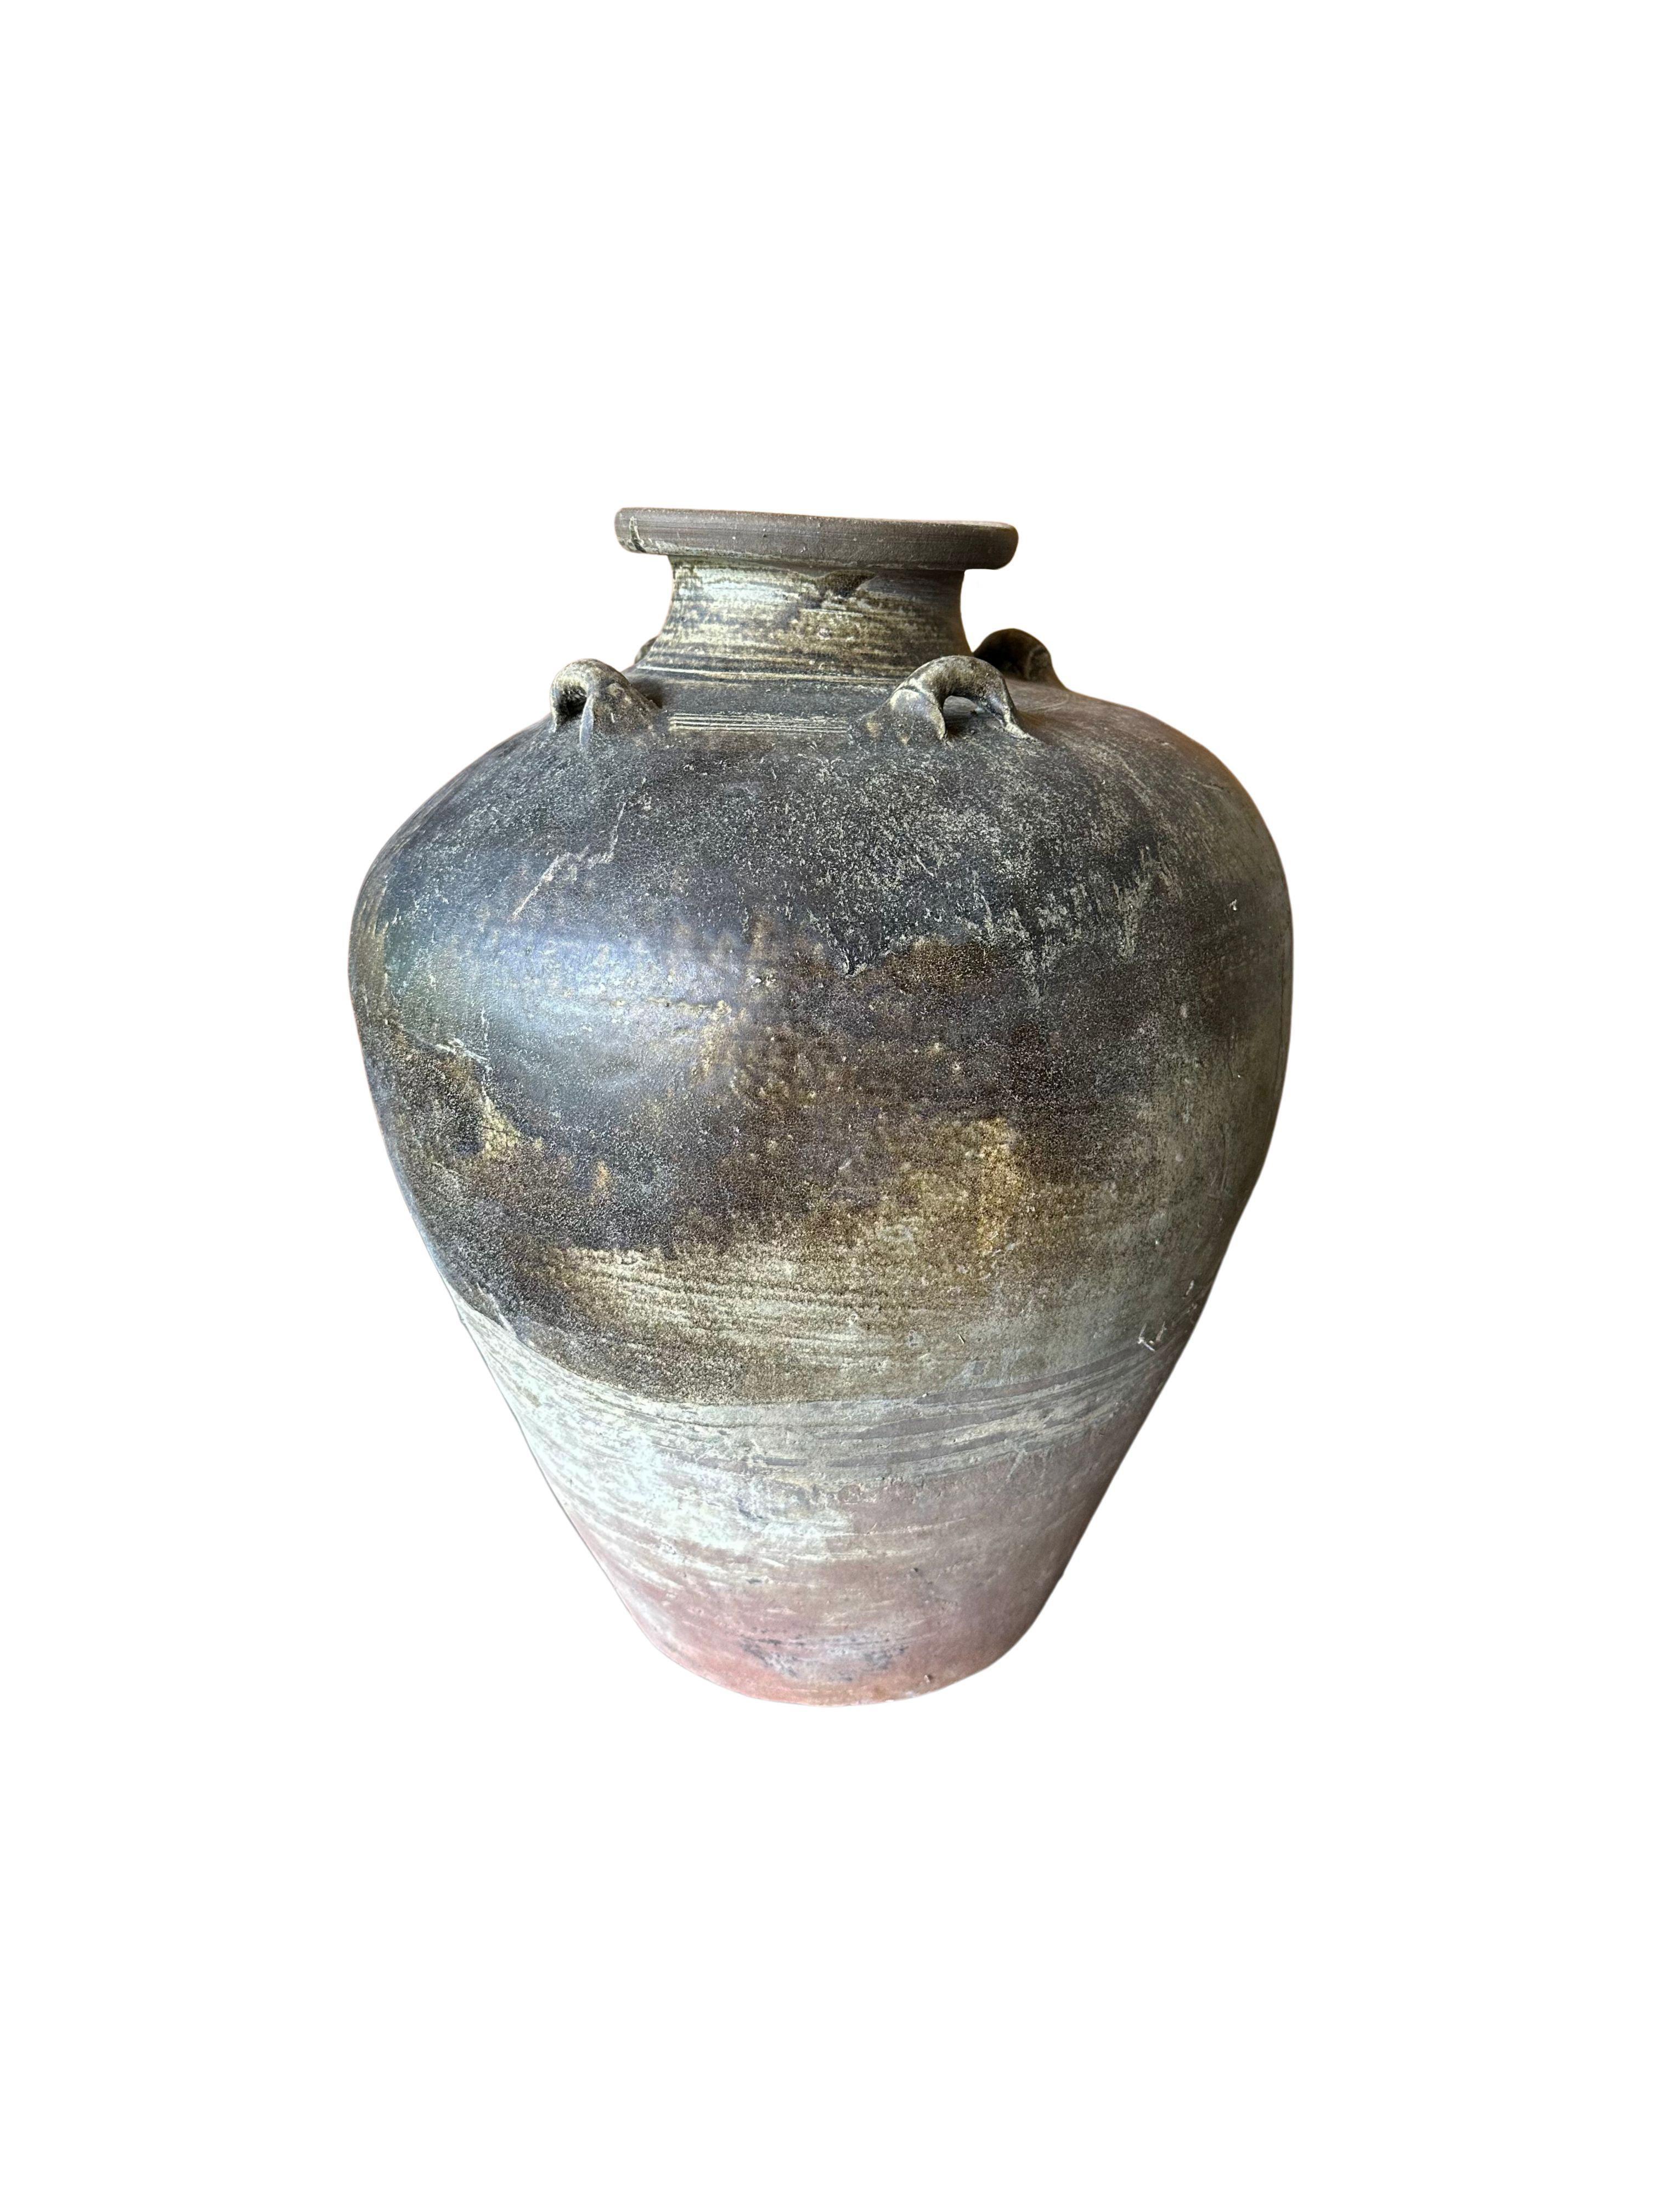 A wonderful example of a 16th century Sawankhalok jar from a Shipwreck off the Coast of the Indonesian Island of Batam. Batam was one of the most substantial and influential ports in the South China Sea where an abundance of trade was conducted. The